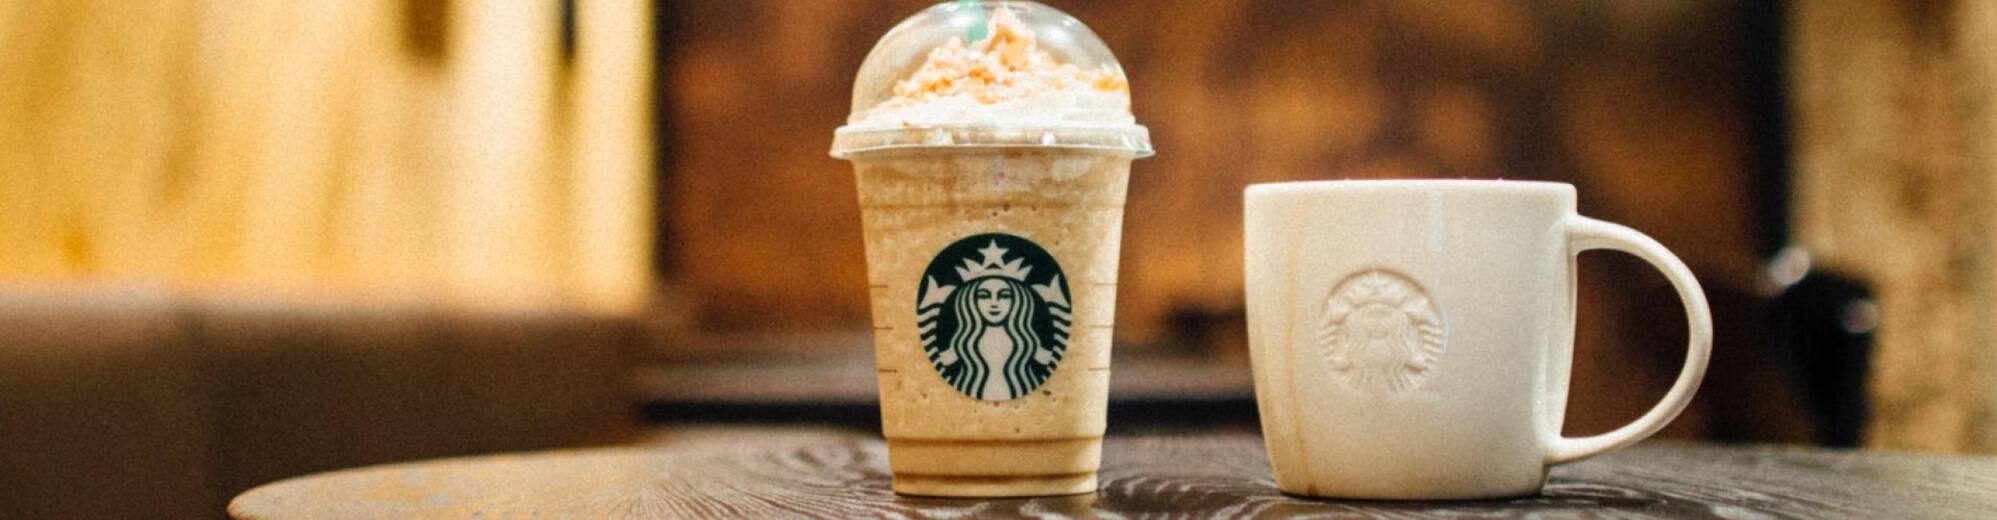 Starbucks Resume: Examples and Guide [10+ Tips]